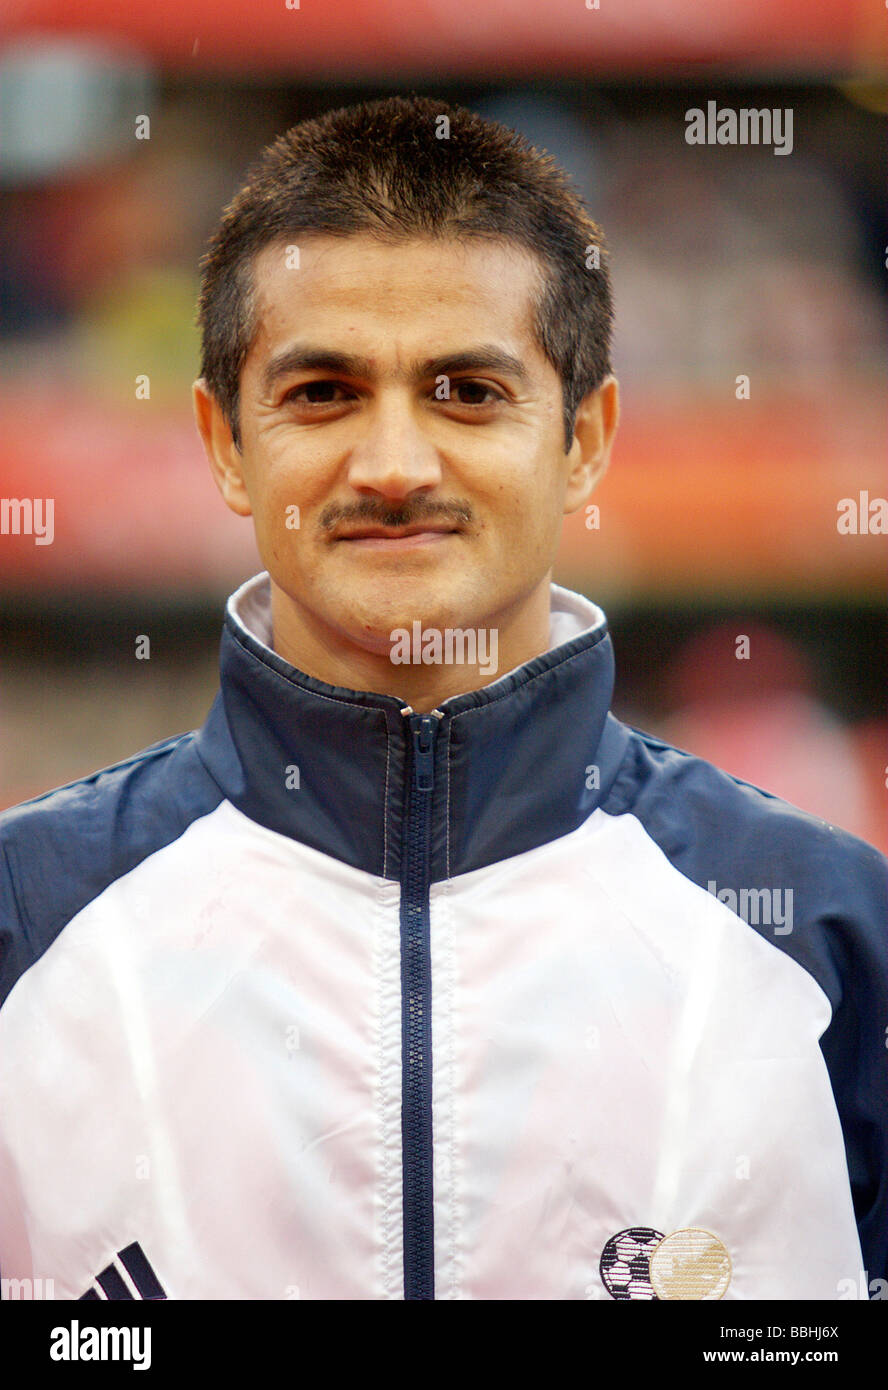 Download preview image - fifa-official-referee-abdul-ebrahim-joins-thousands-of-local-fans-BBHJ6X